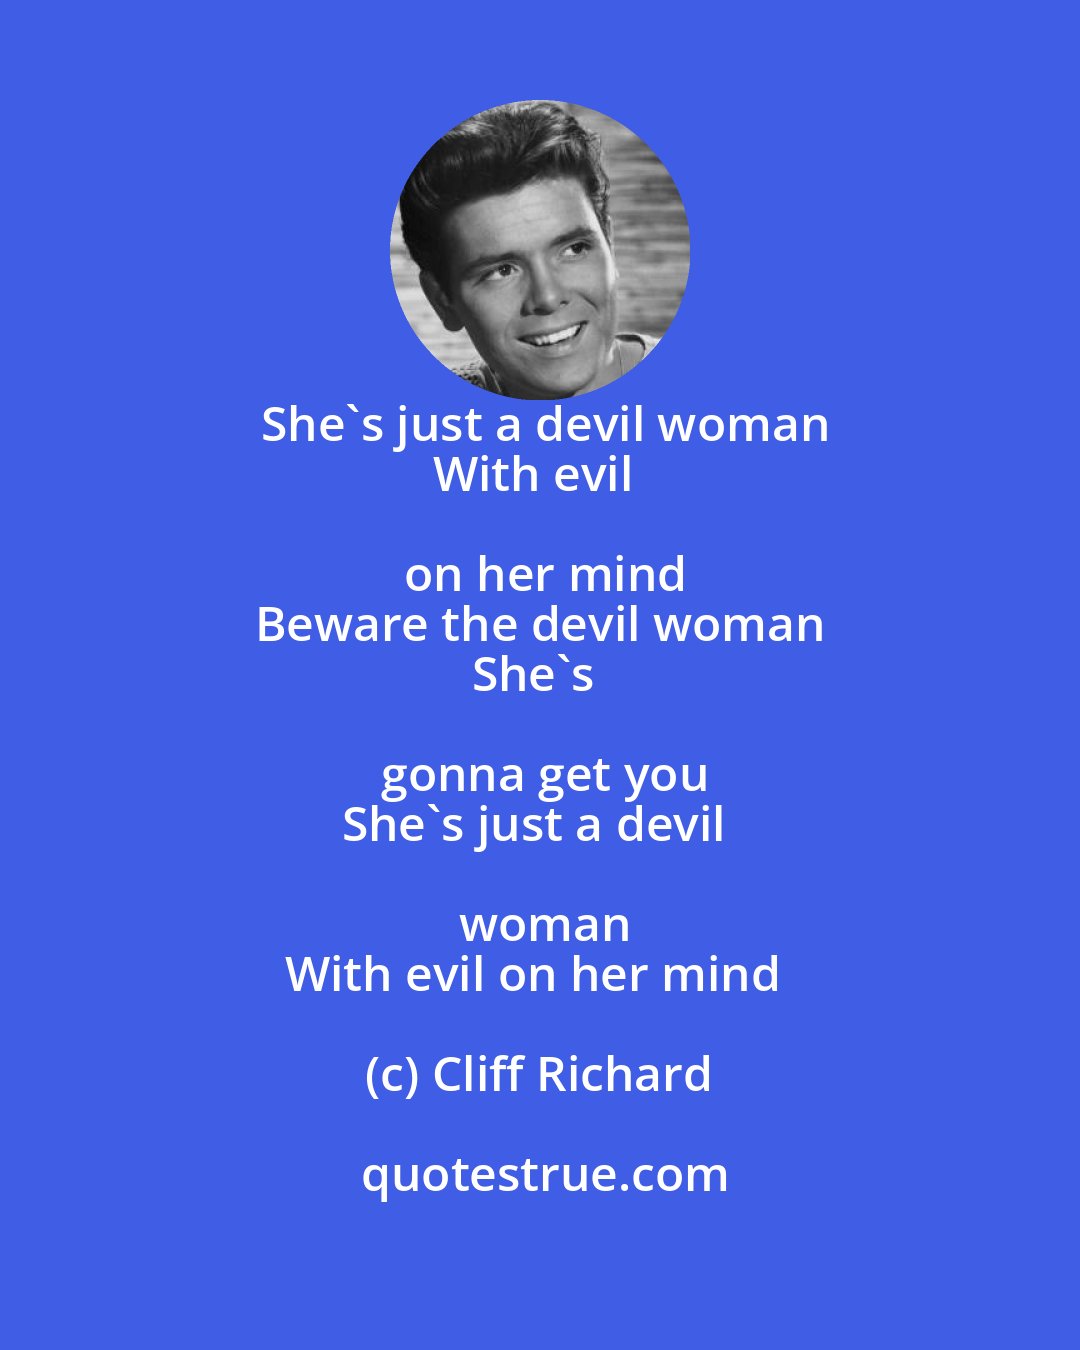 Cliff Richard: She's just a devil woman
With evil on her mind
Beware the devil woman
She's gonna get you
She's just a devil woman
With evil on her mind